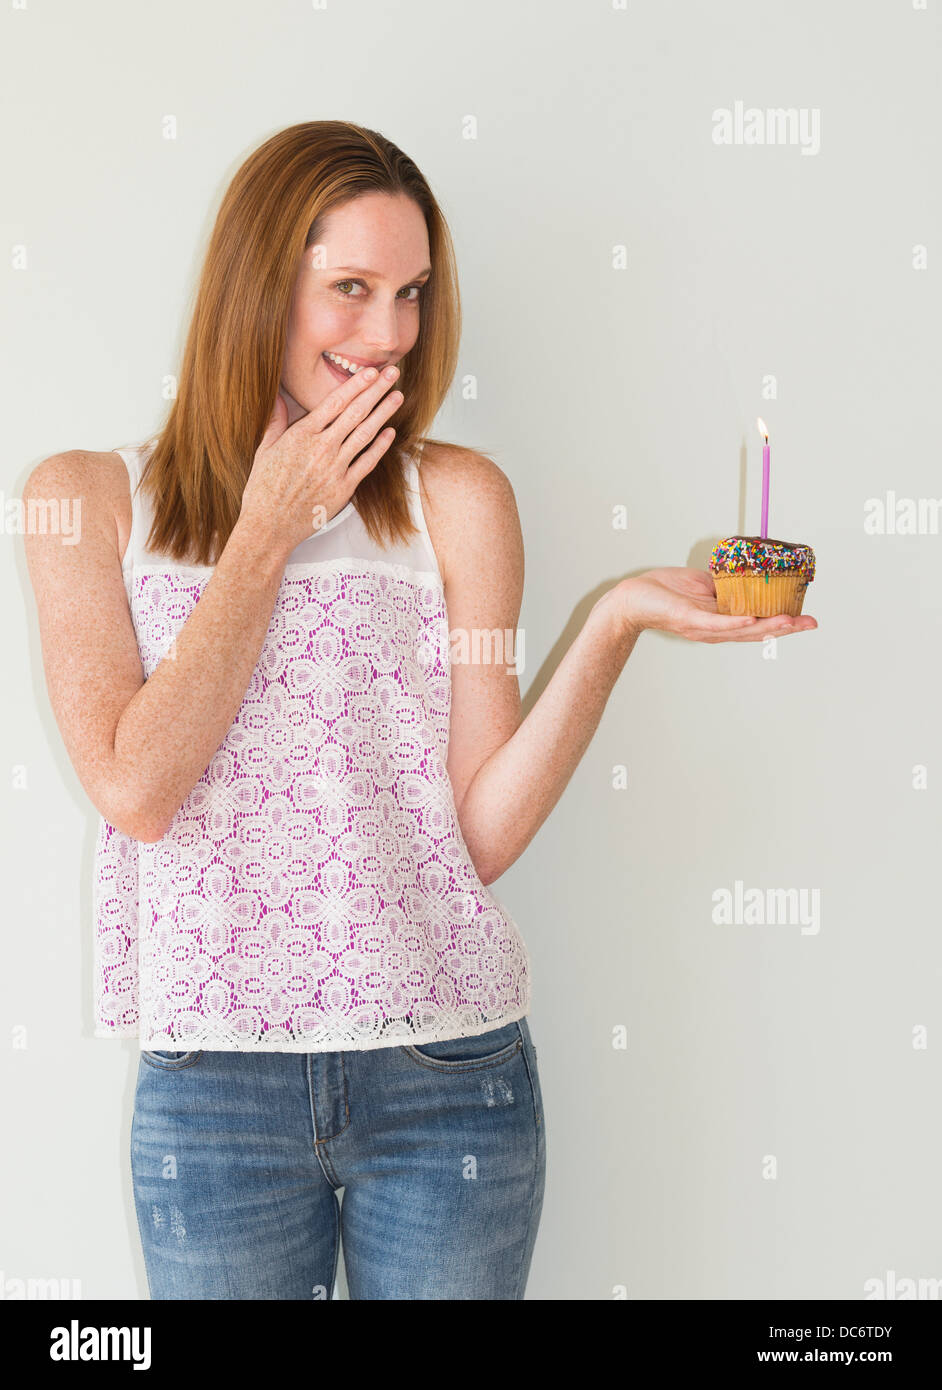 Studio portrait of woman holding birthday cupcake Banque D'Images